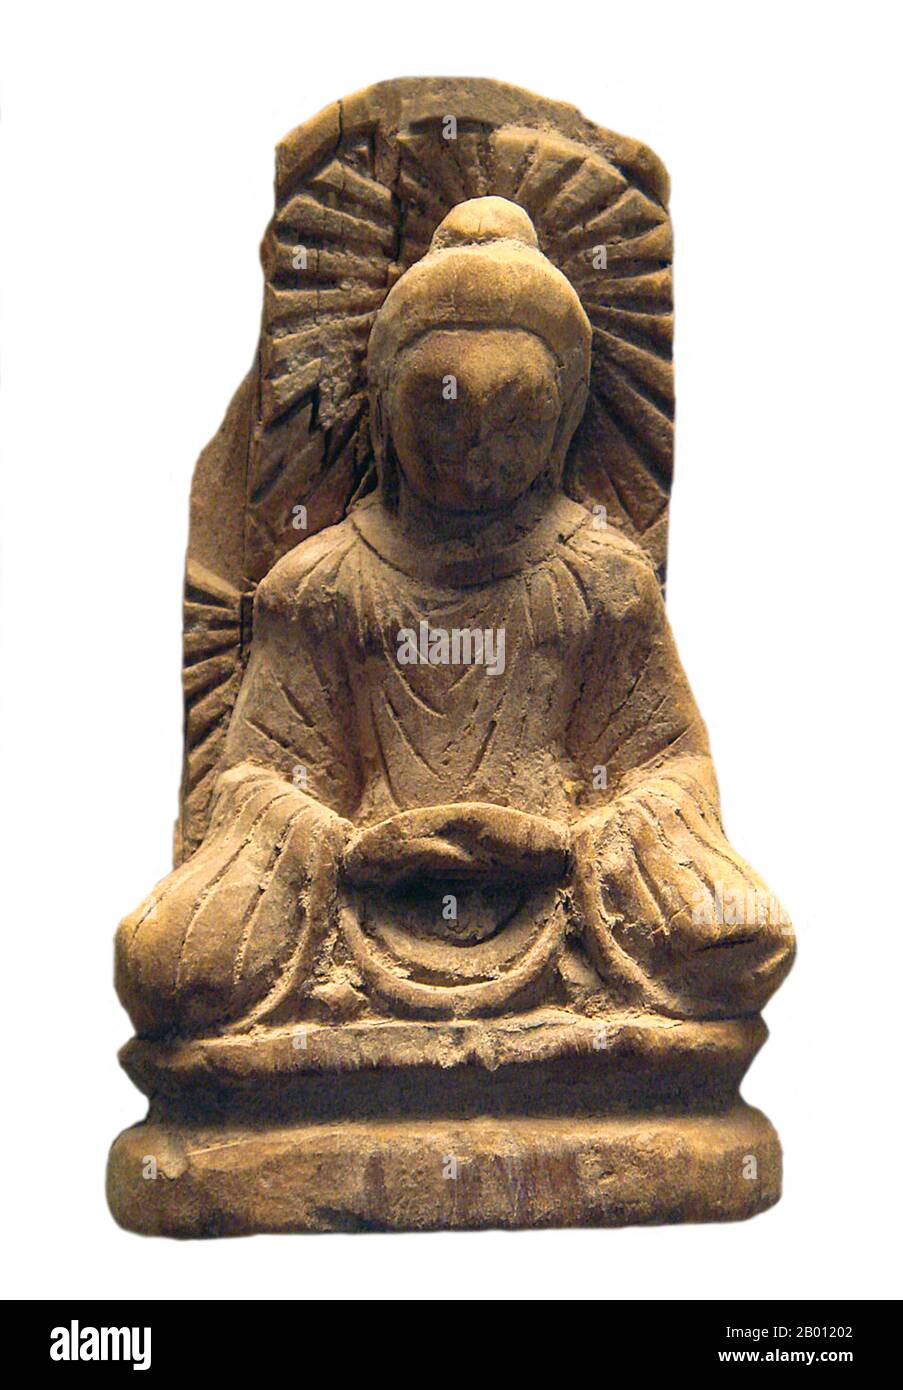 China: A 5th century Serindian Buddha image from Tumshuq (also Tumxuk, Tumushuke) in Western Xinjiang.  Serindian art developed from the 2nd through the 11th century C.E. in Serindia or Xinjiang, the western region of China that forms part of Central Asia. It derives from the art of the Gandhara district of what is now Afghanistan and Pakistan. Gandharan sculpture combined Indian traditions with Greek influences. Greek-influenced culture may have existed in the region before Alexander the Great's invasions, but the empires founded by him and his successors were a major syncretic cultural force Stock Photo